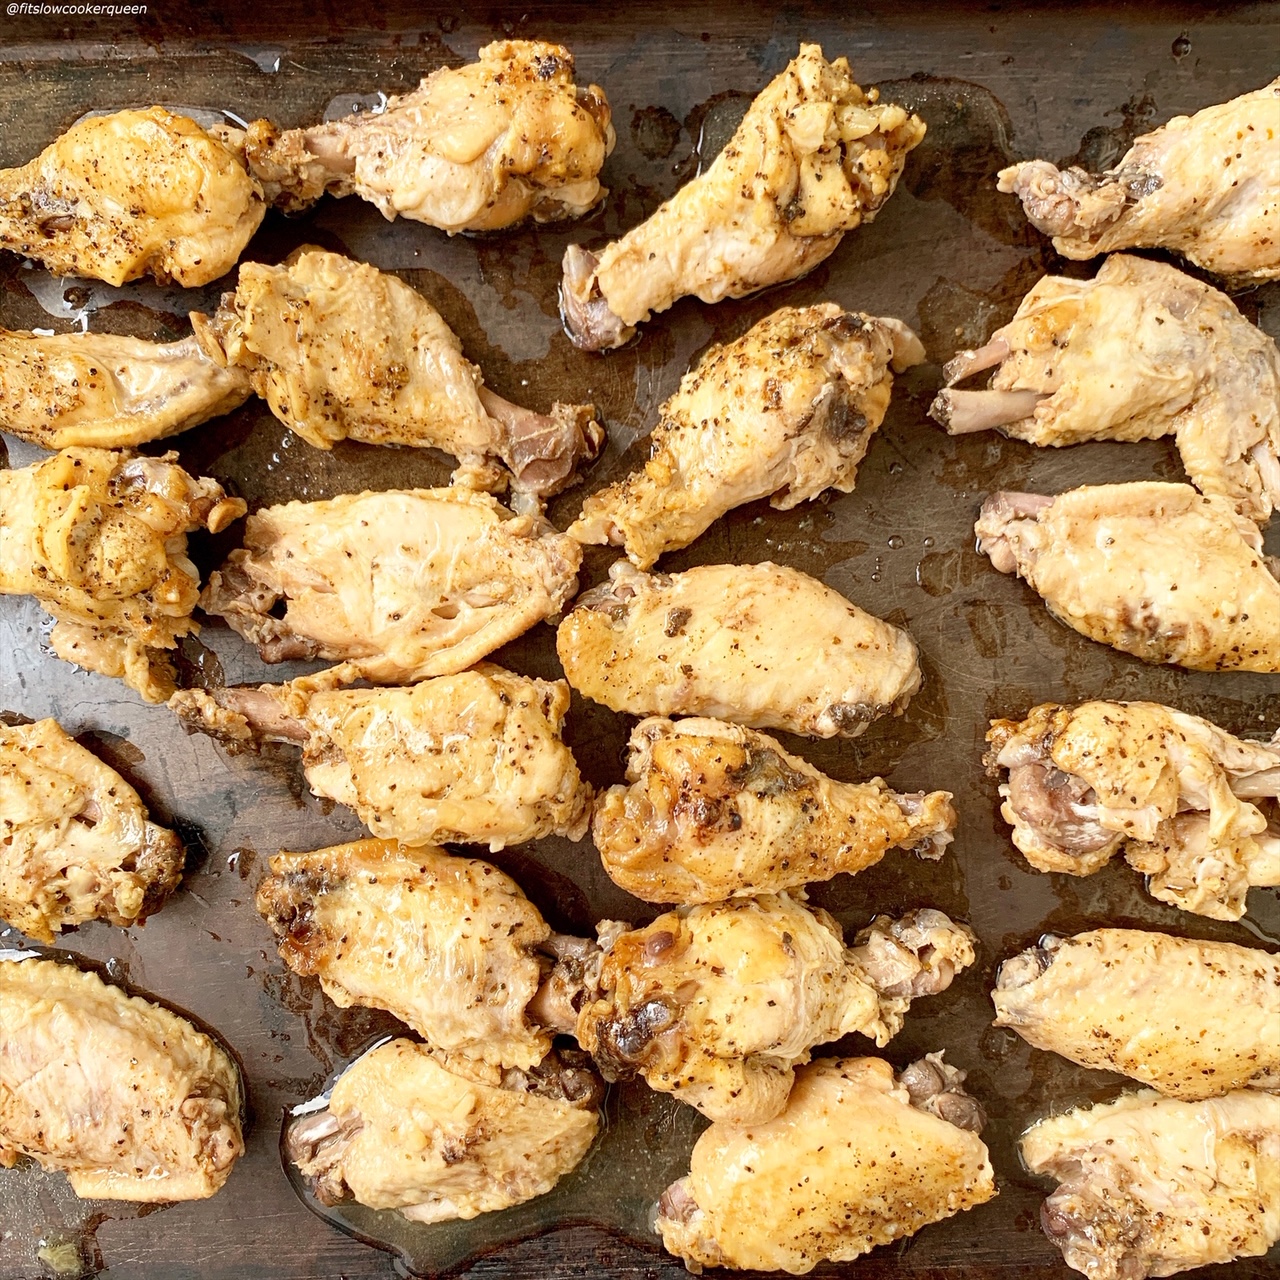 chicken wings lined on a baking sheet for broiling